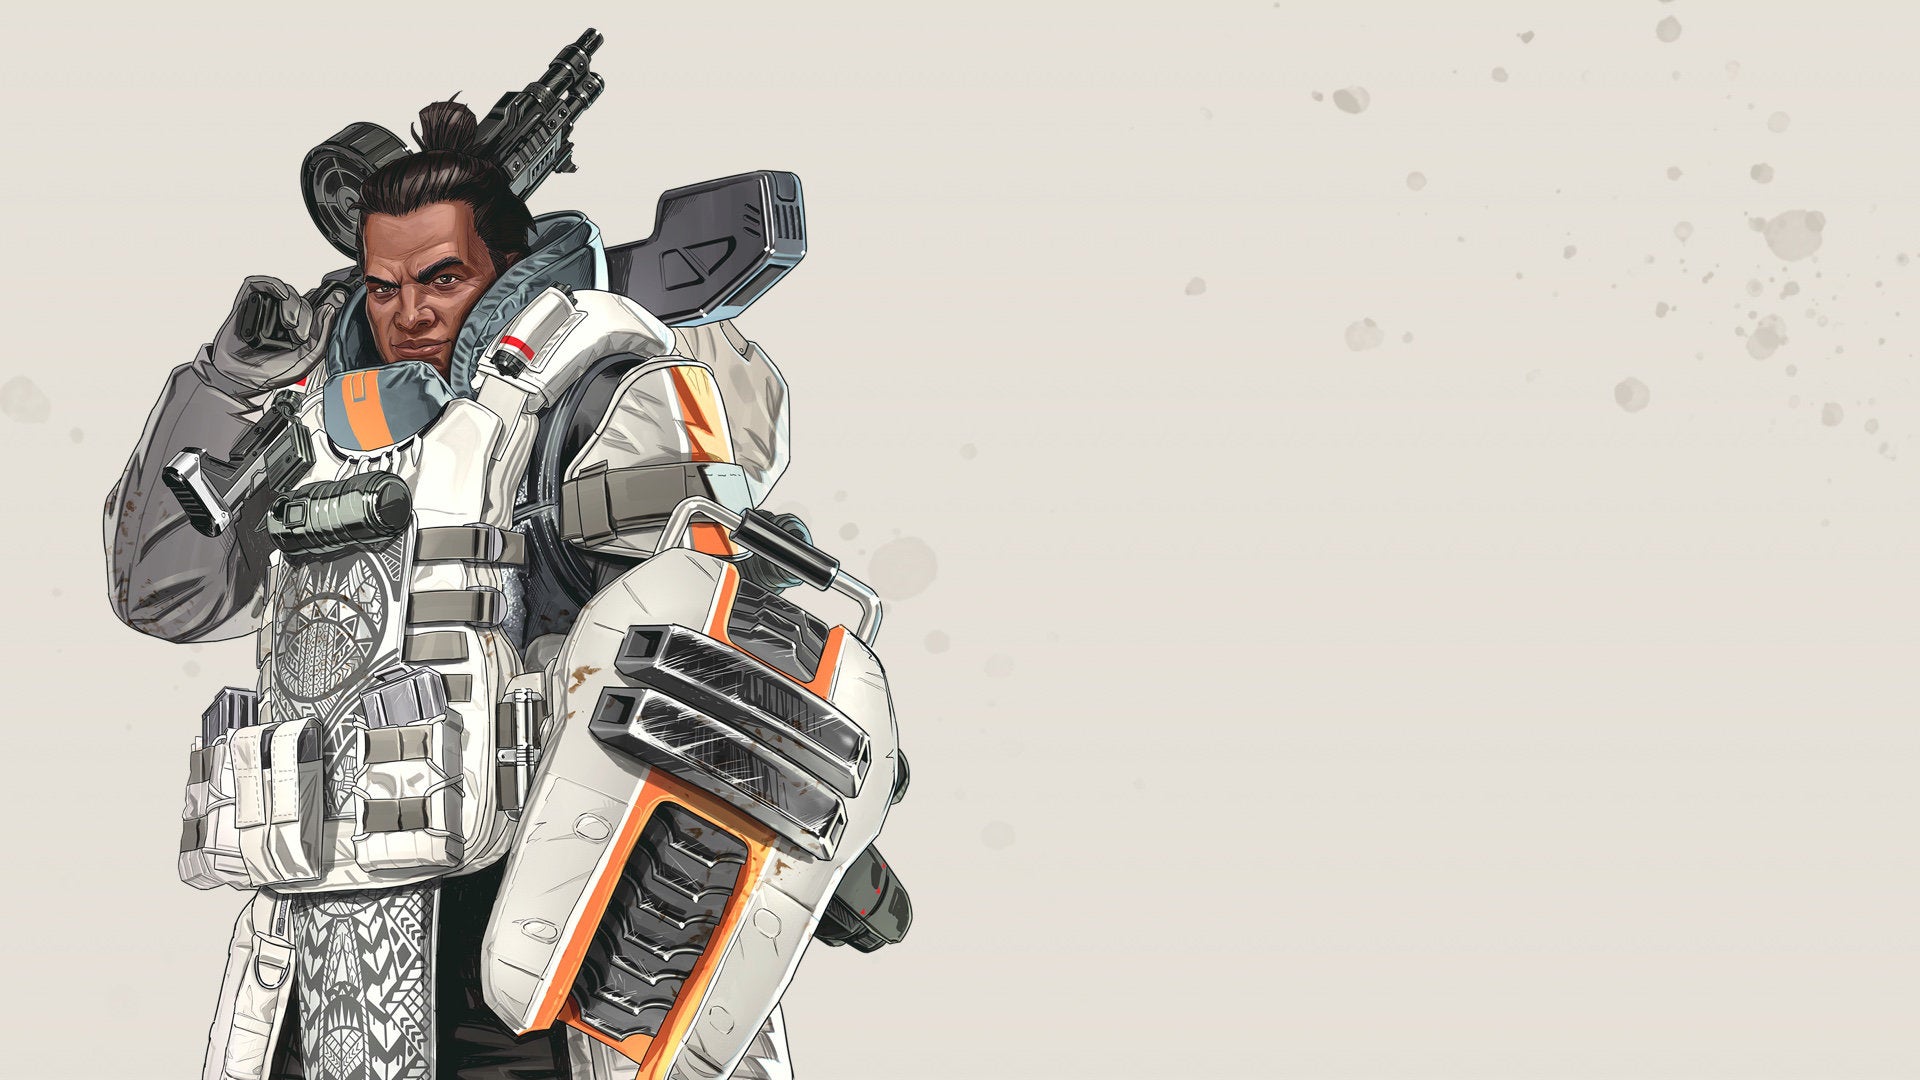 Official art of Gibraltar, one of the Apex Legends characters.